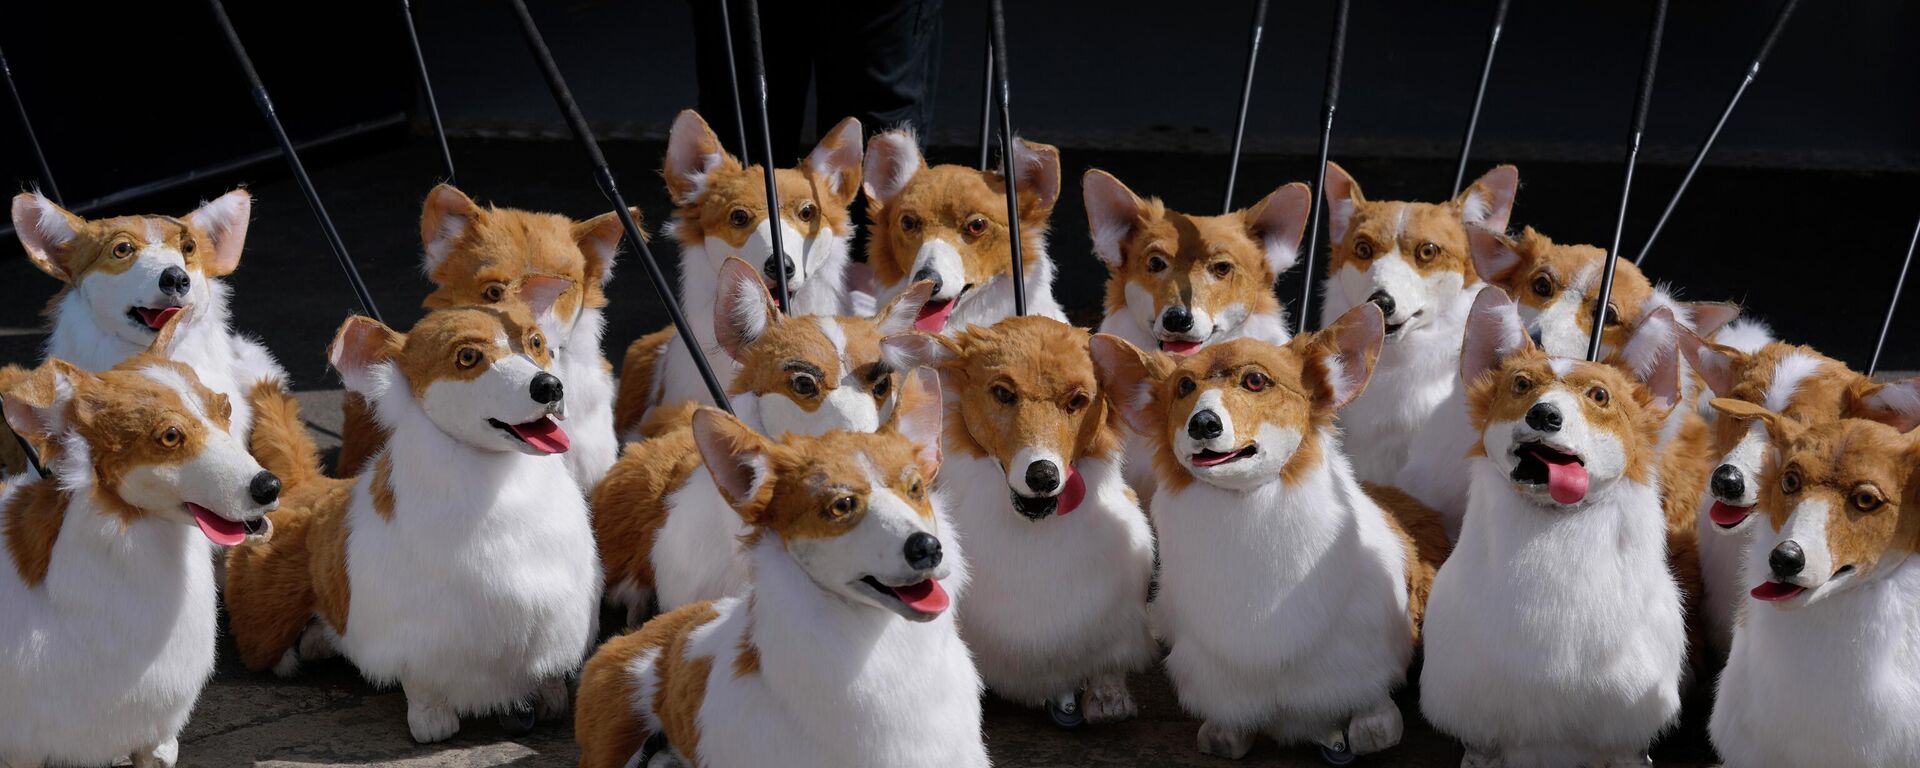 A group of corgi puppets made by puppet maker Louise Jones each one an individual and based on past and present Royal corgis, part of 'The Queen's Favourites' for the Platinum Jubilee Pageant, in Coventry, England, Thursday, May 5, 2022.  - Sputnik International, 1920, 10.09.2022